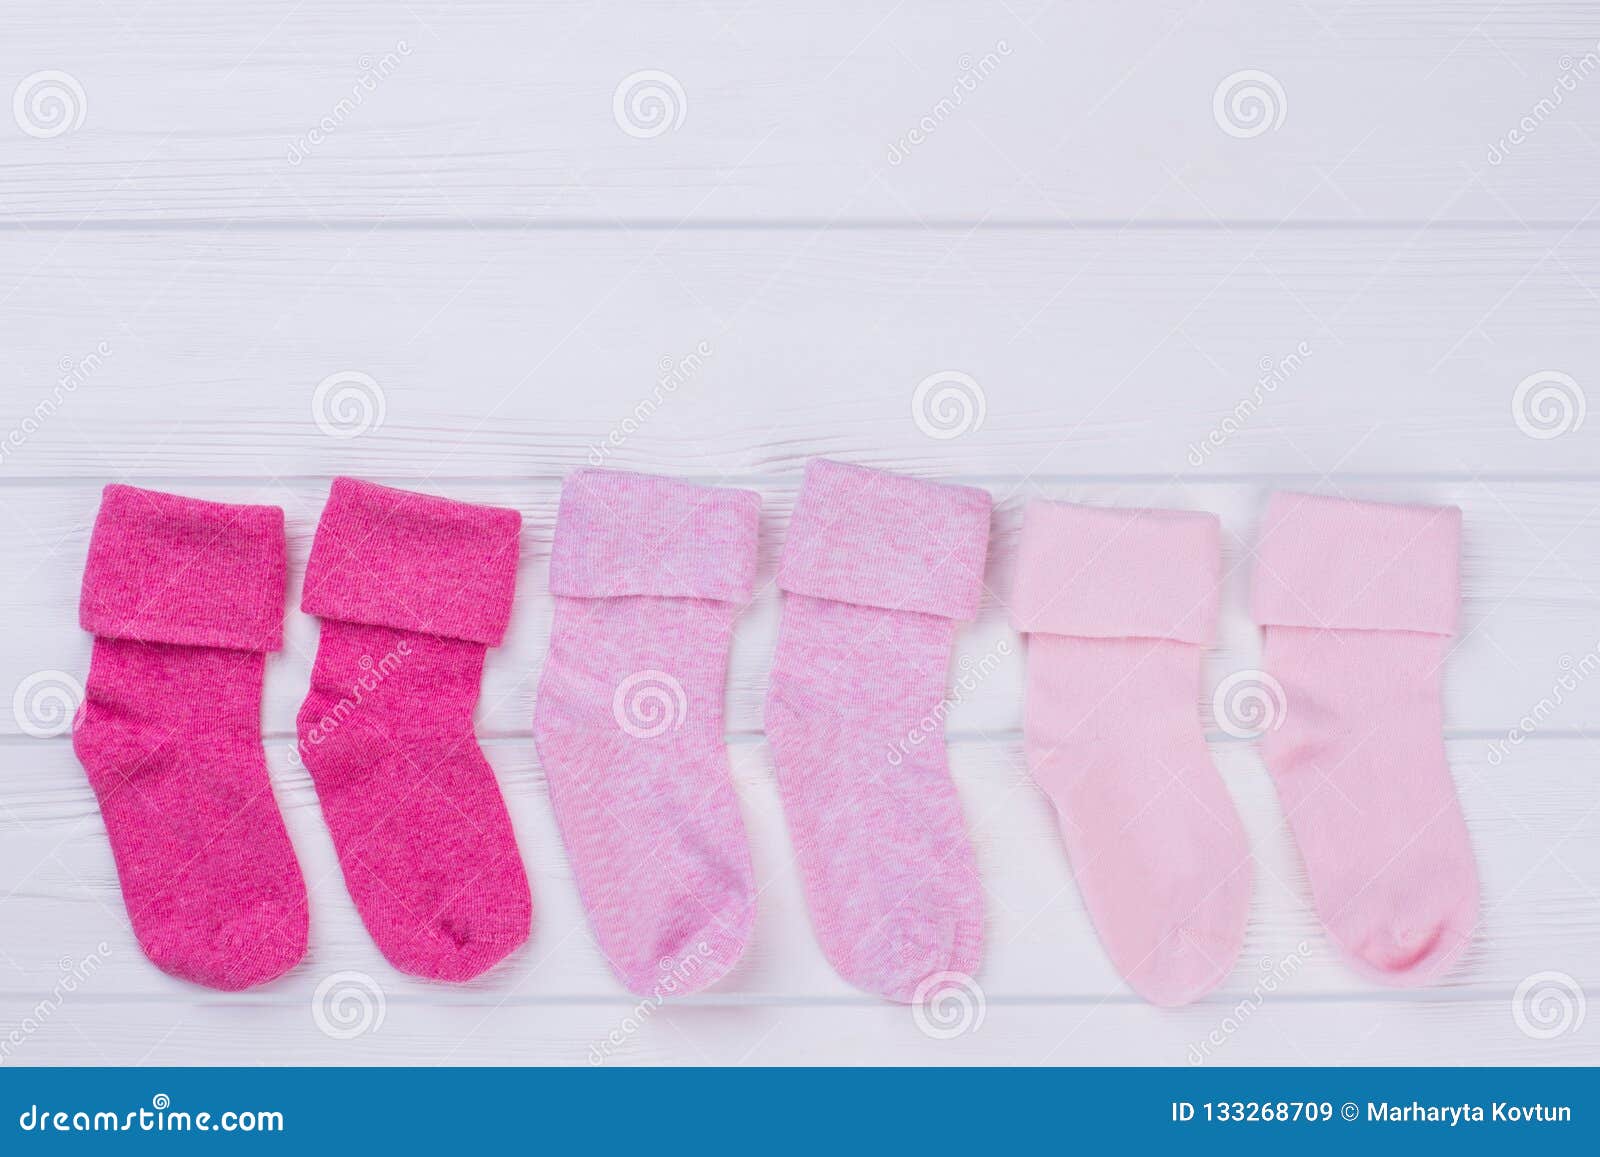 Colourful Pairs of Wool and Cotton Pink Socks Stock Image - Image of ...